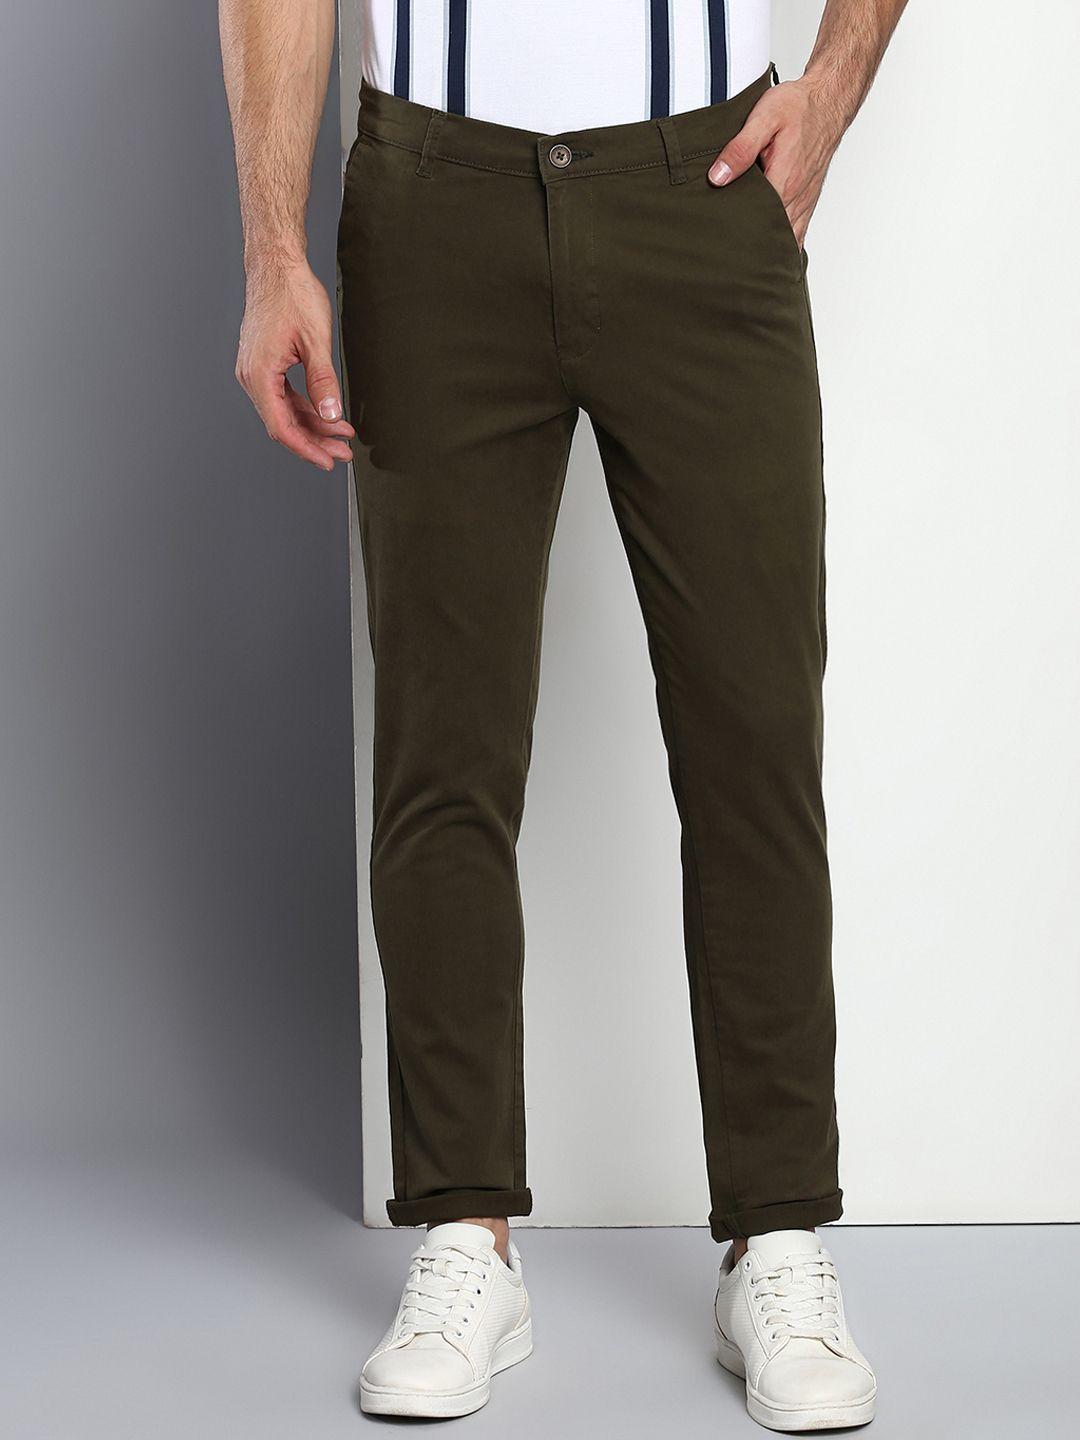 dennis lingo men olive green tapered fit cotton chinos trouser